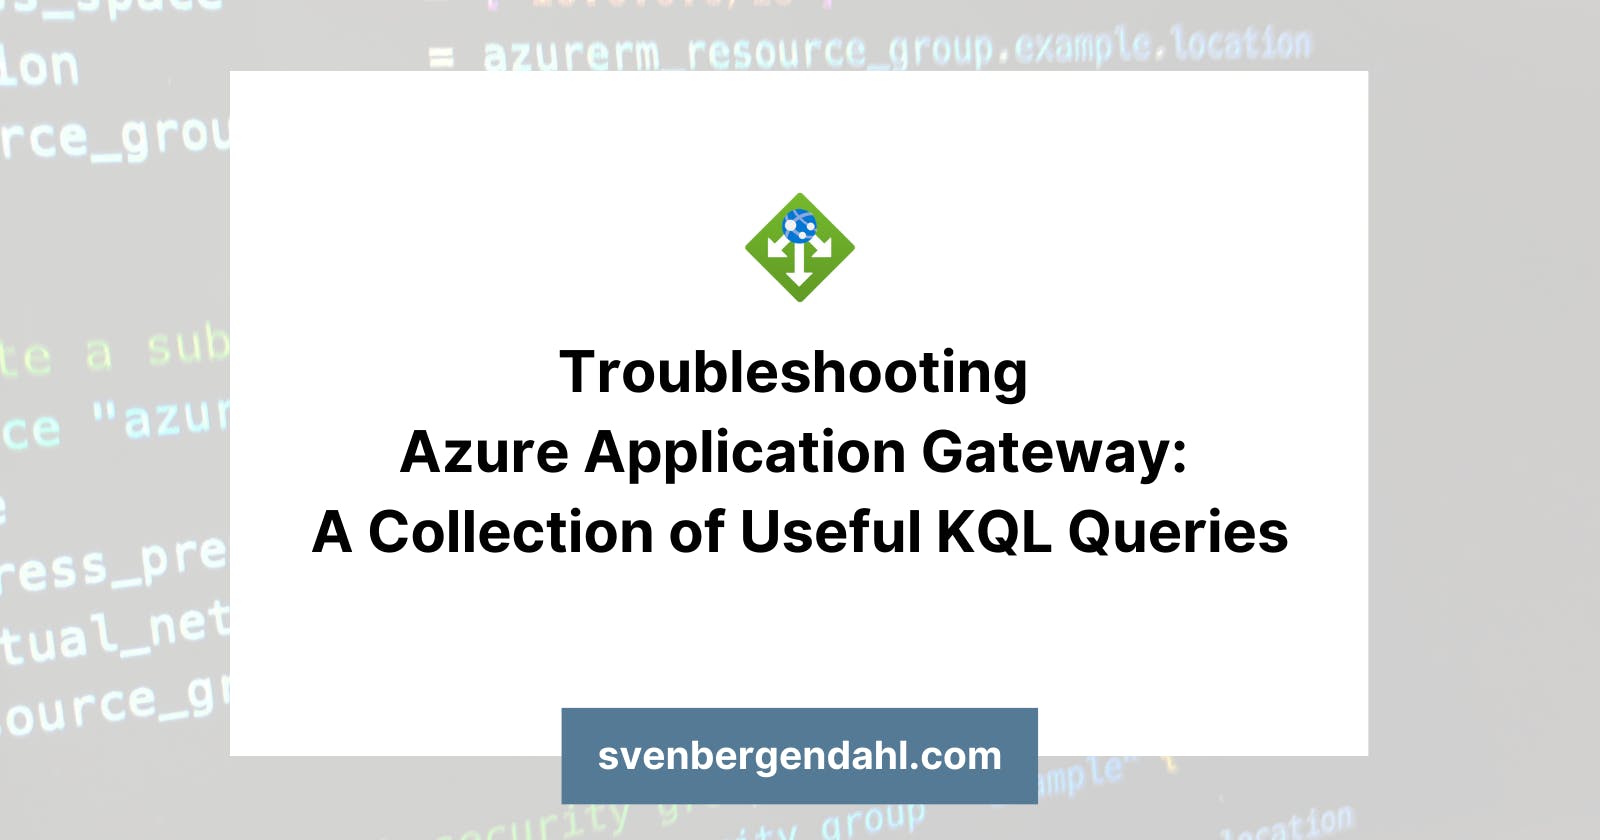 Troubleshooting Azure Application Gateway: A Collection of Useful KQL Queries